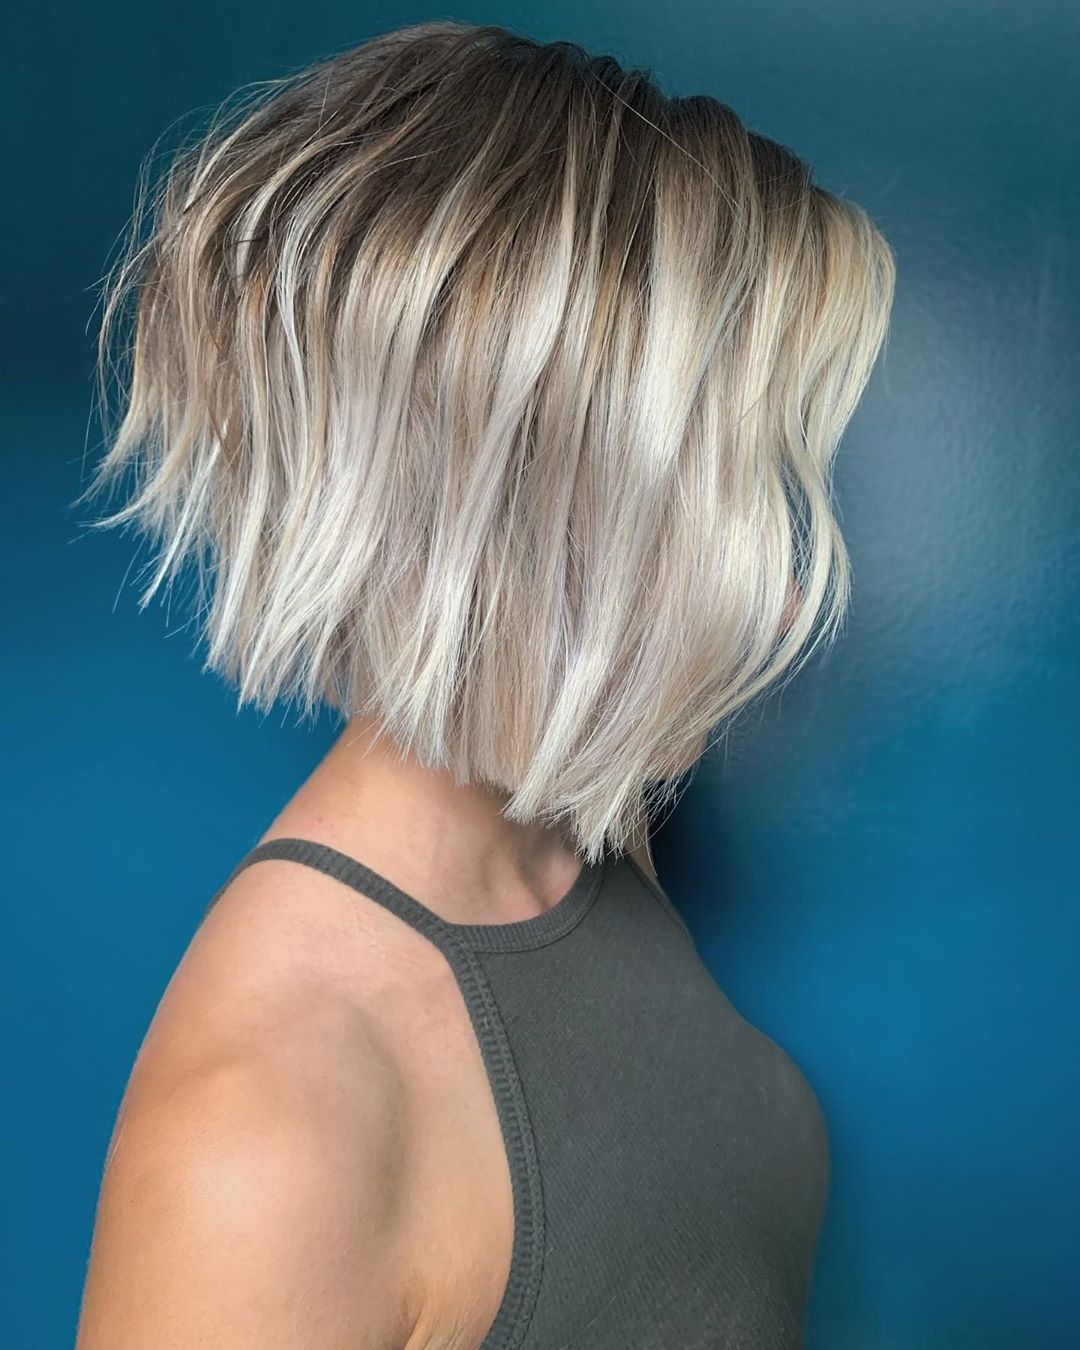 70+ Short Blonde Hairstyles And New Trends In 2022 With Regard To 2017 Icy Blonde Inverted Bob Haircuts (View 17 of 20)